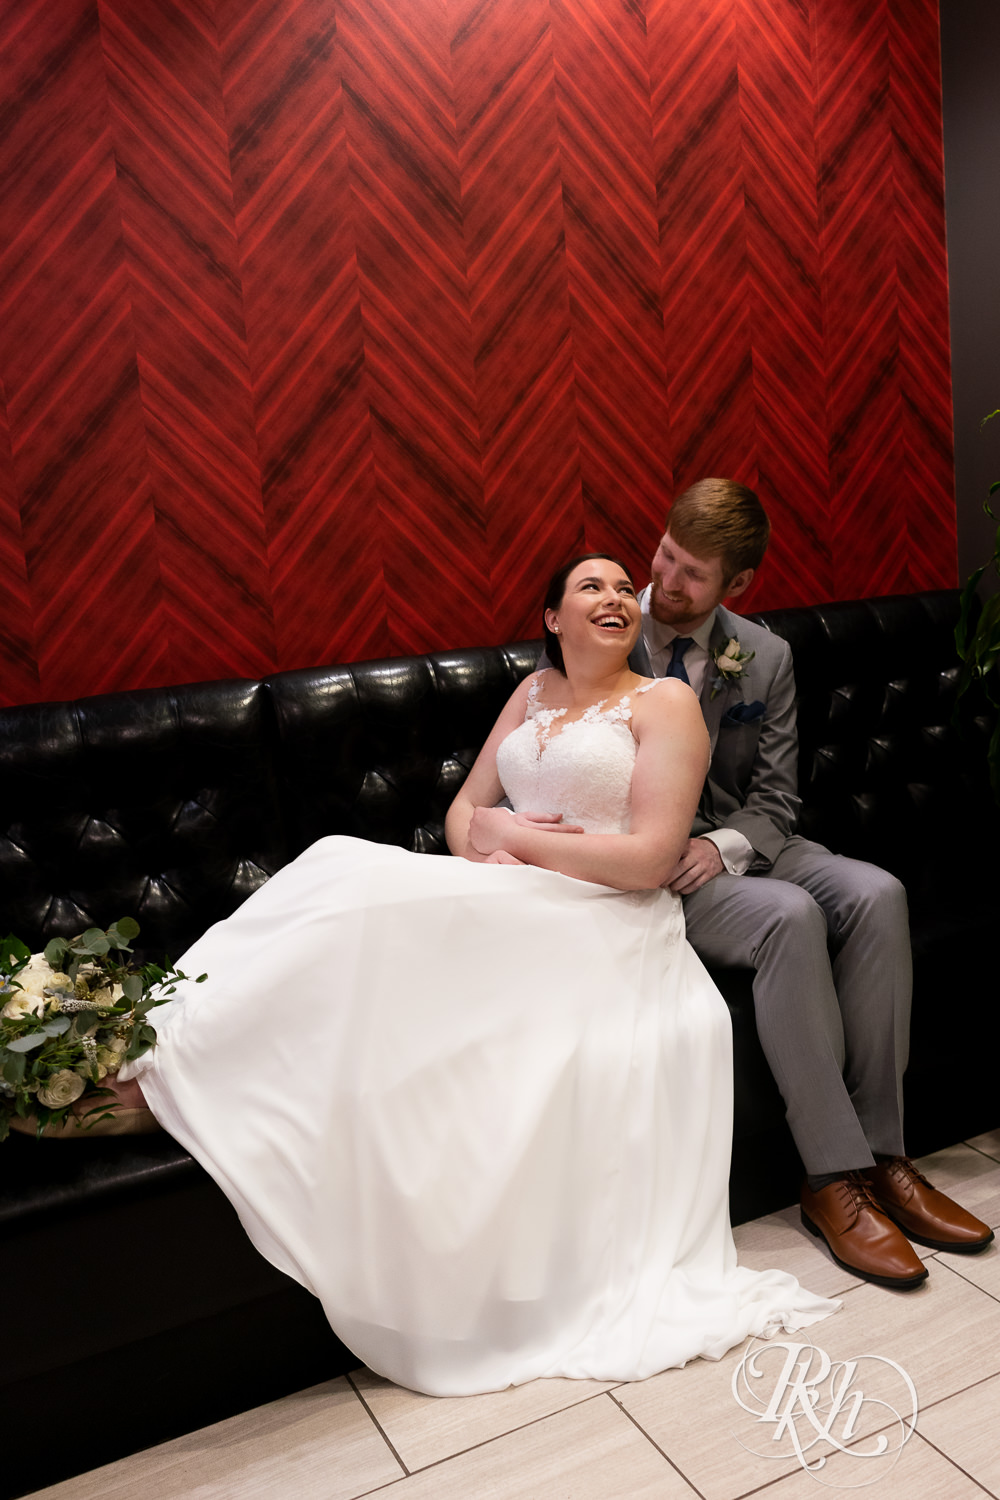 Bride and groom smile on couch by red wall at Doubletree Hilton Saint Paul in Saint Paul, Minnesota.